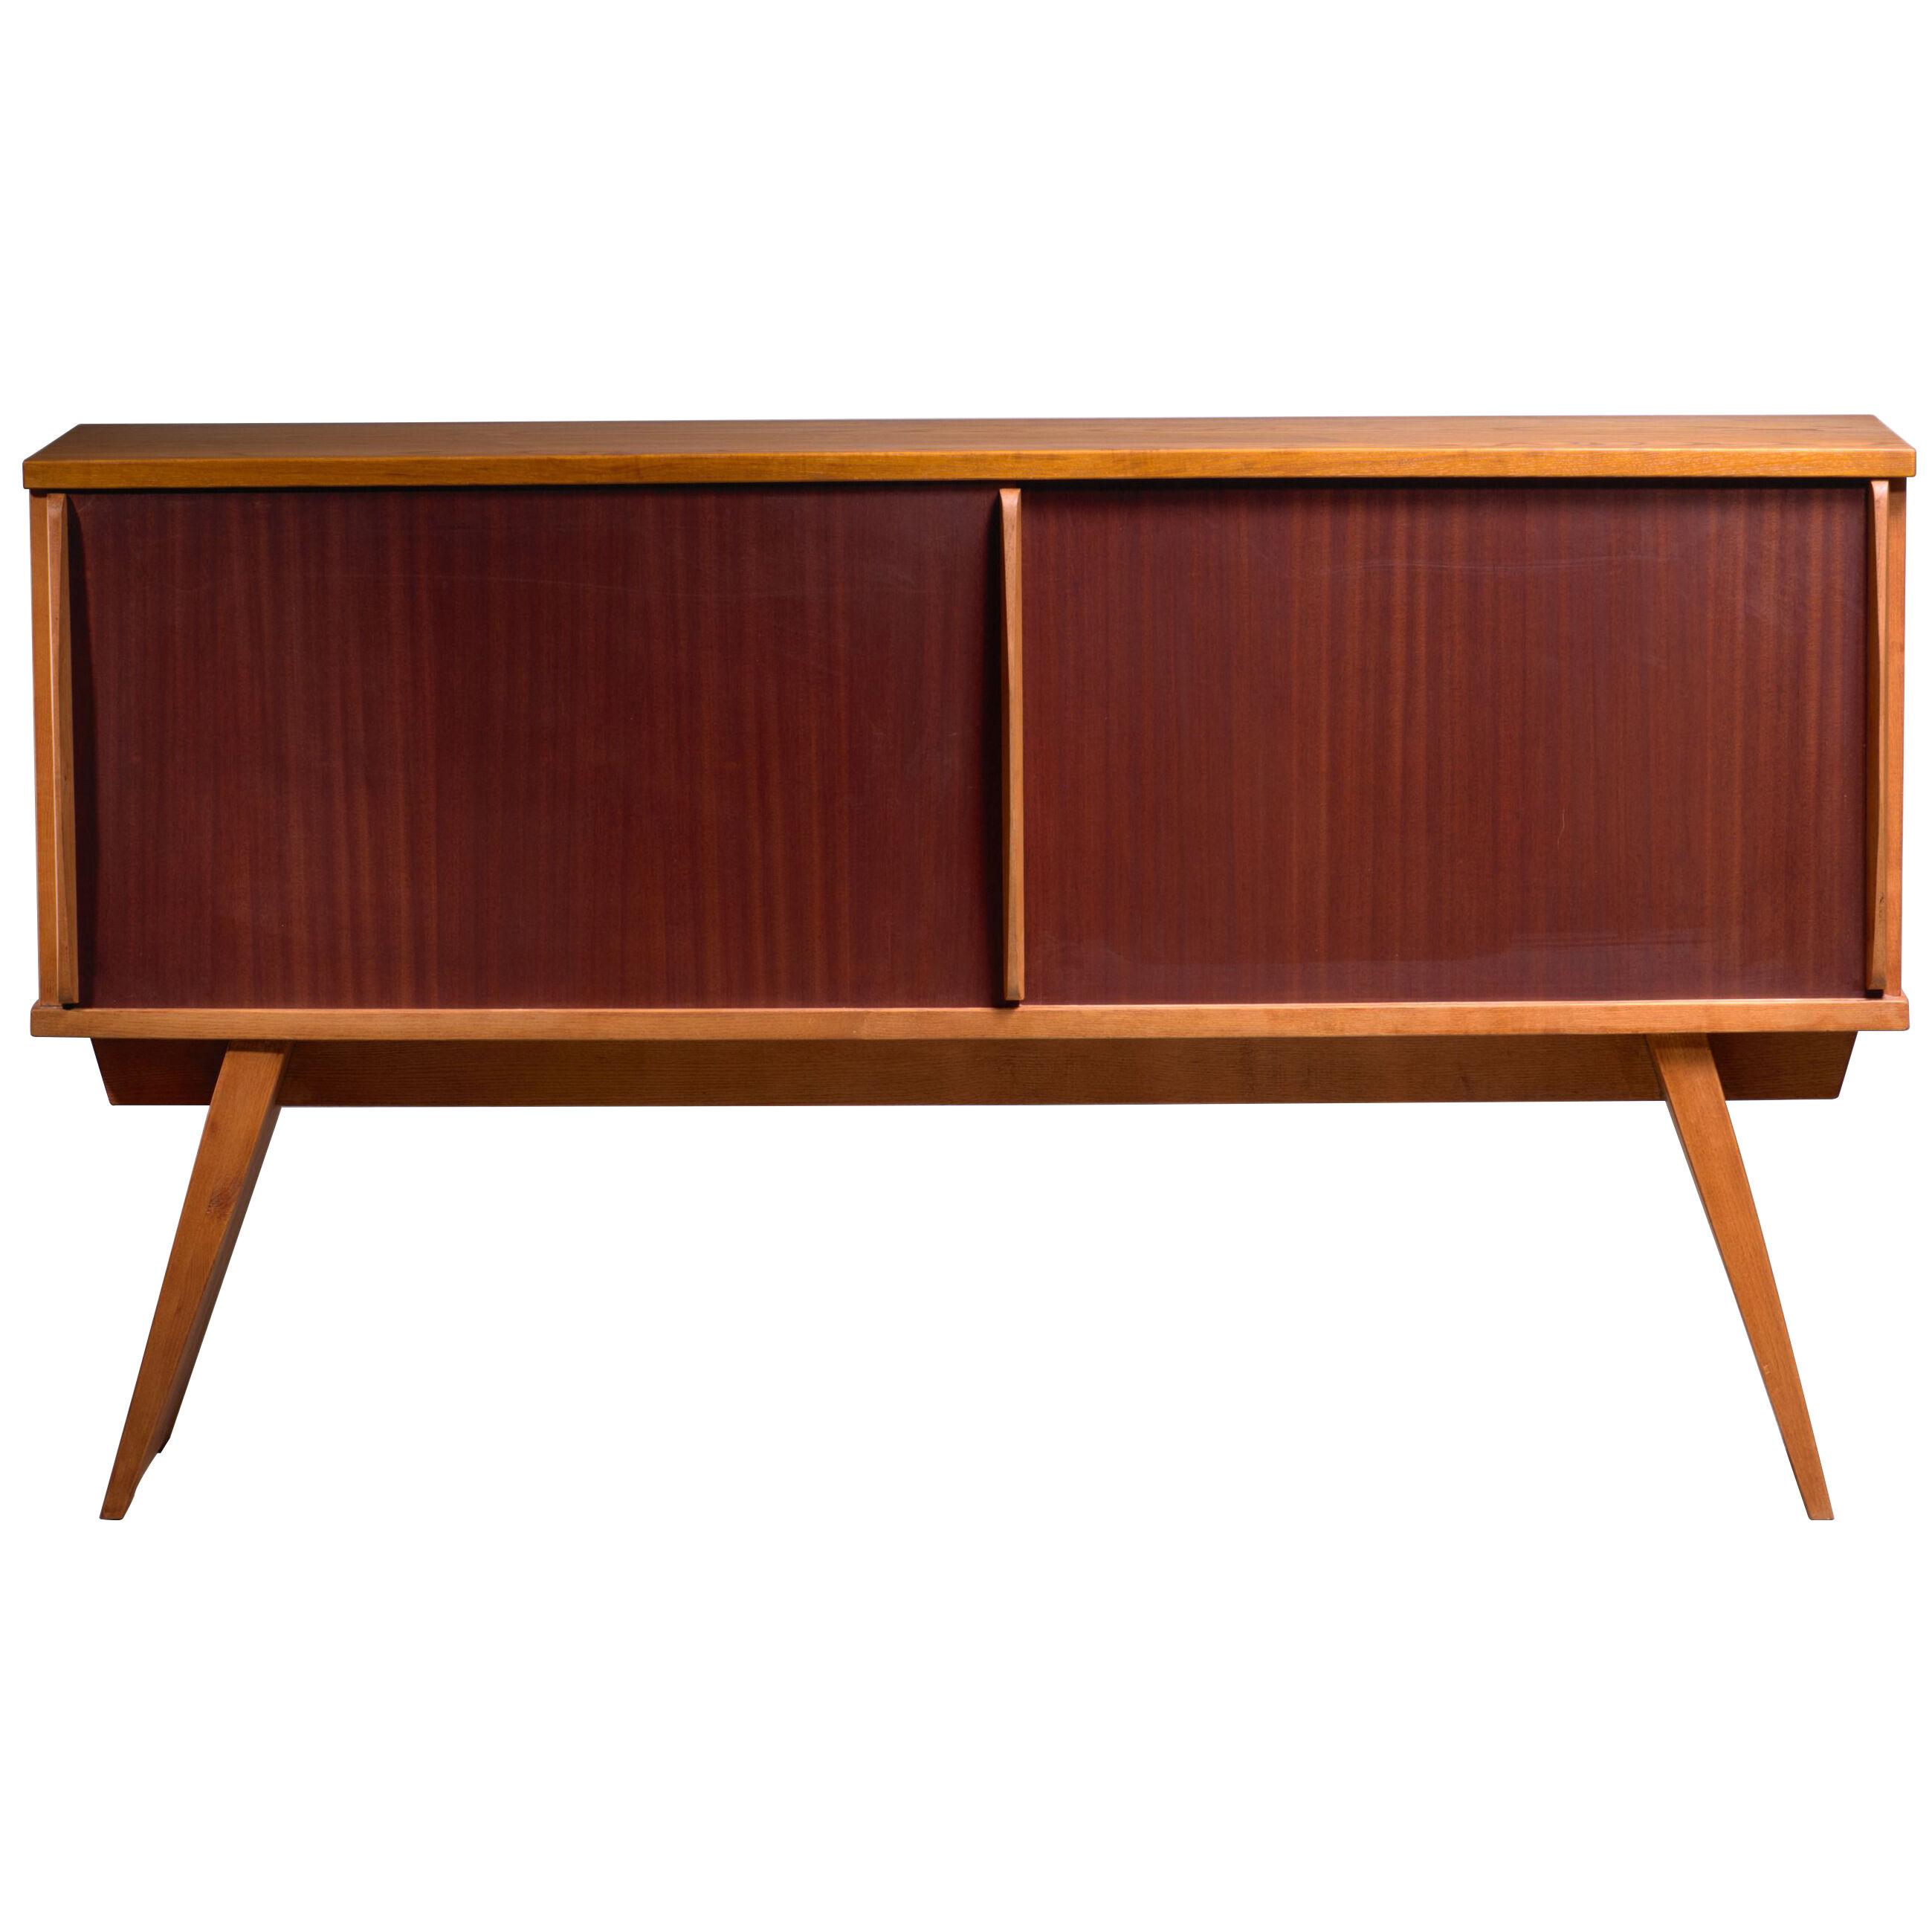 Charlotte Perriand - Pierre Jeanneret sideboard, early 1940s